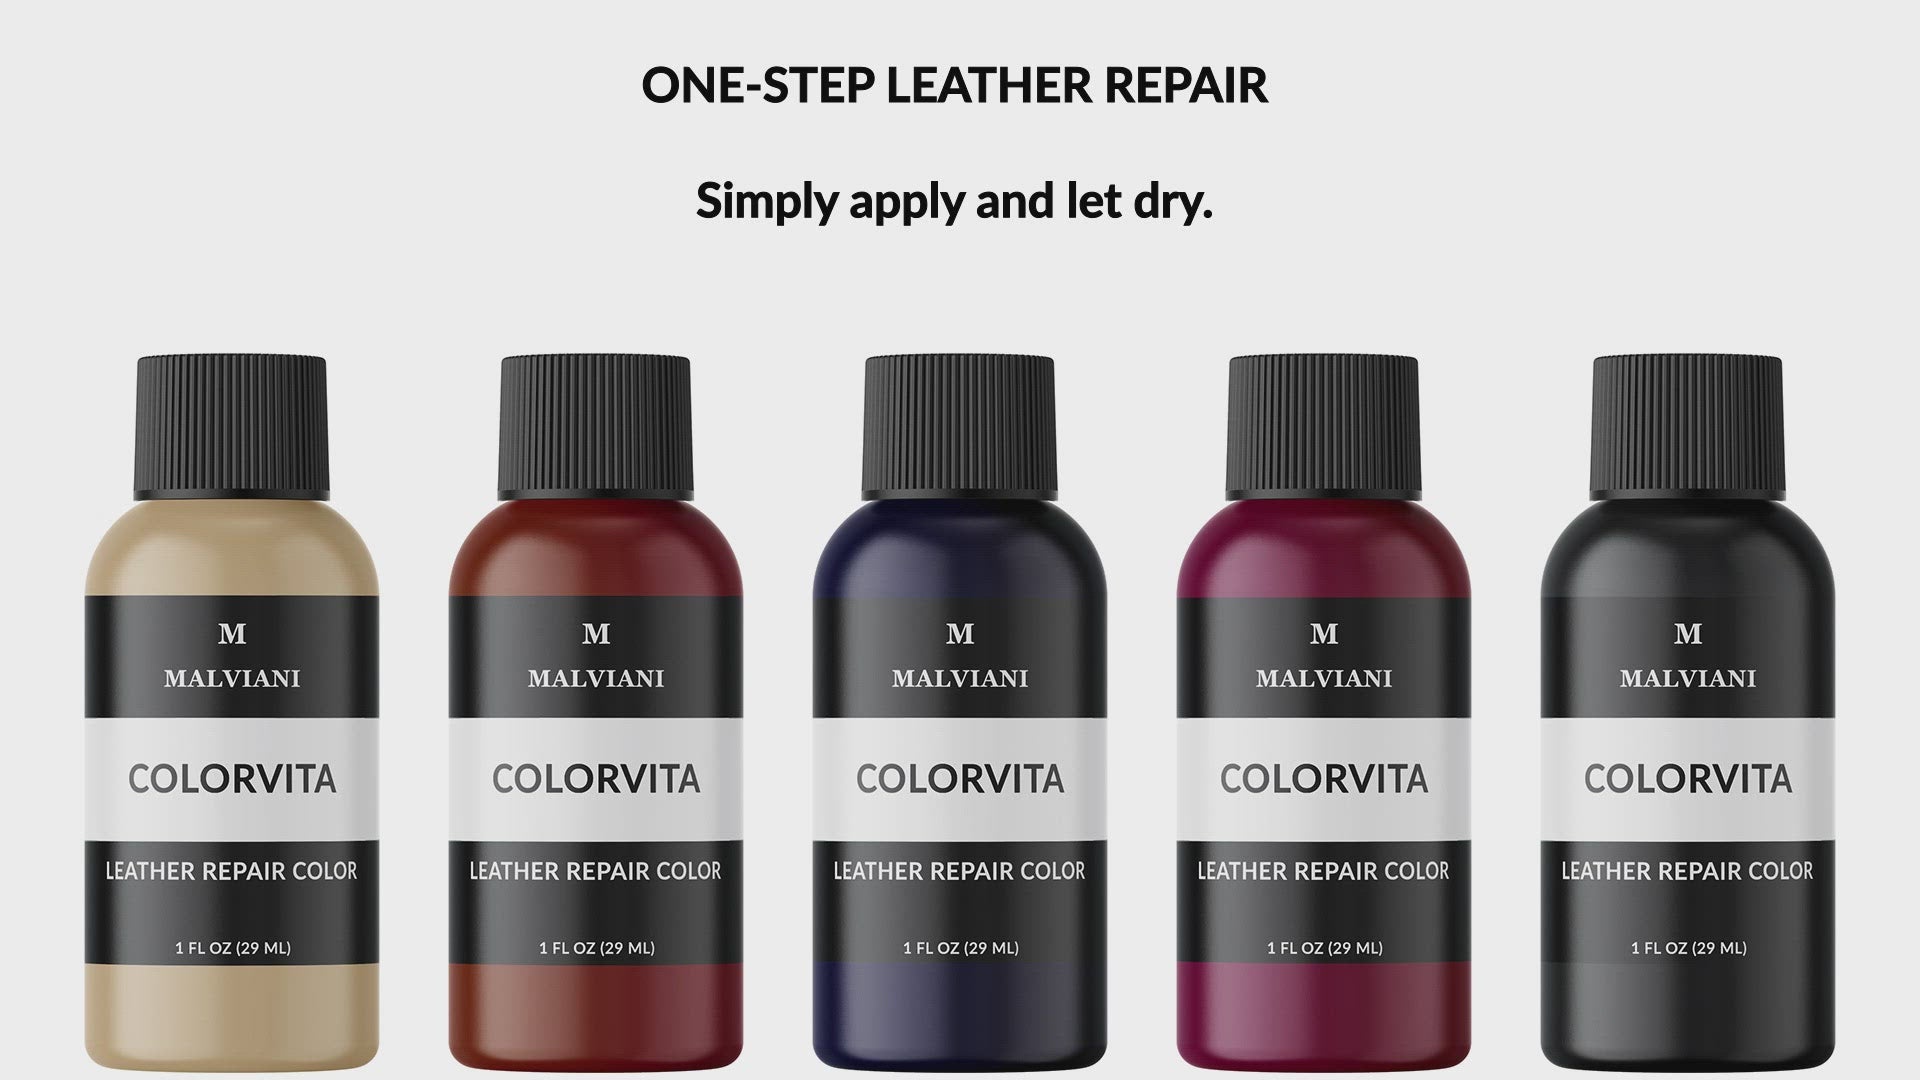 Red Couch Repair Slideshow - THE LEATHER REPAIR SPECIALIST